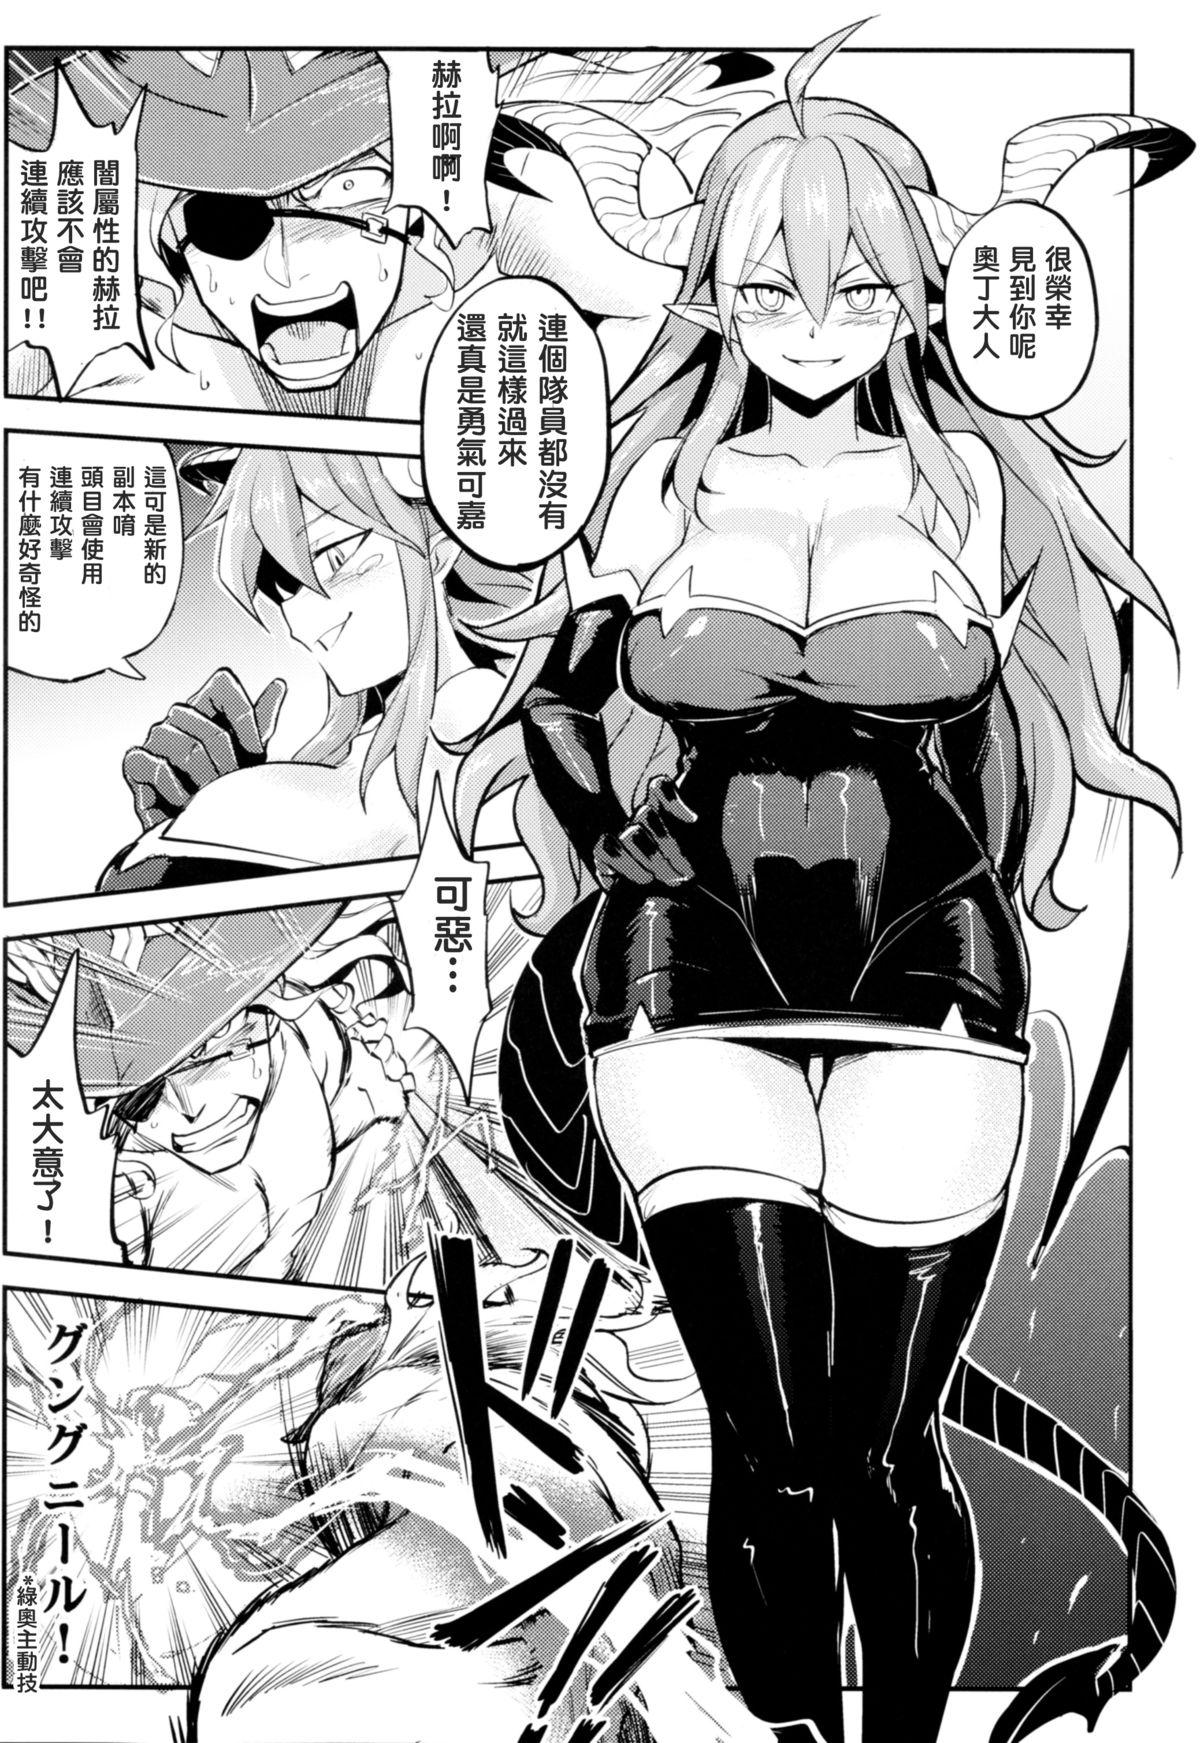 Concha Ganbare! Odin-sama! - Puzzle and dragons Free 18 Year Old Porn - Page 7